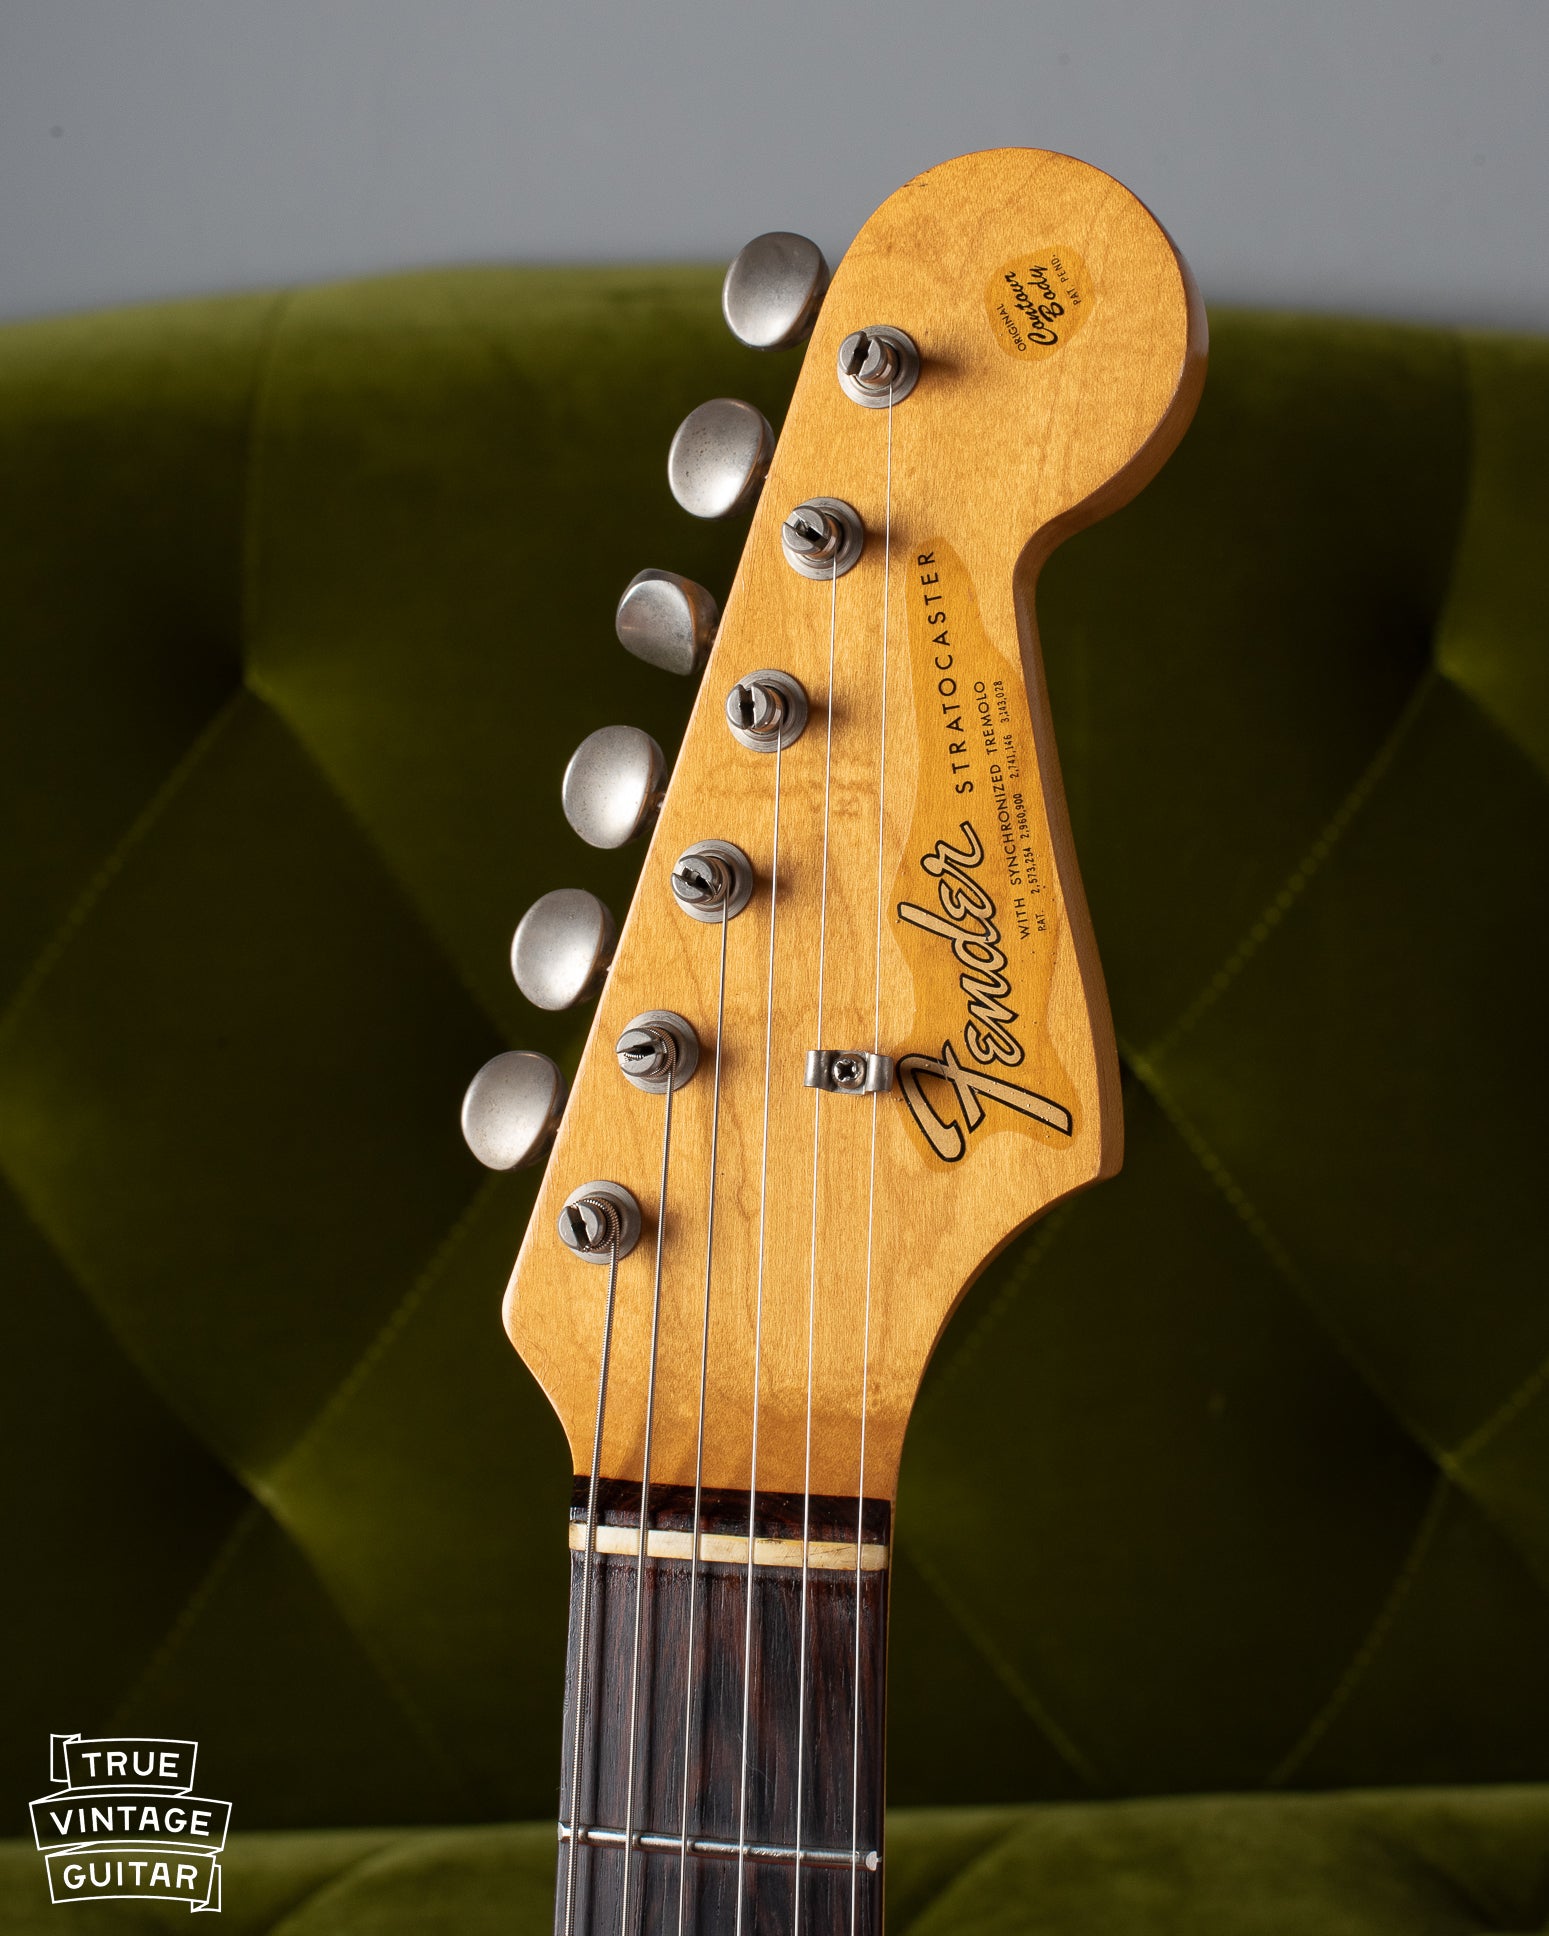 Headstock with transitional Fender logo